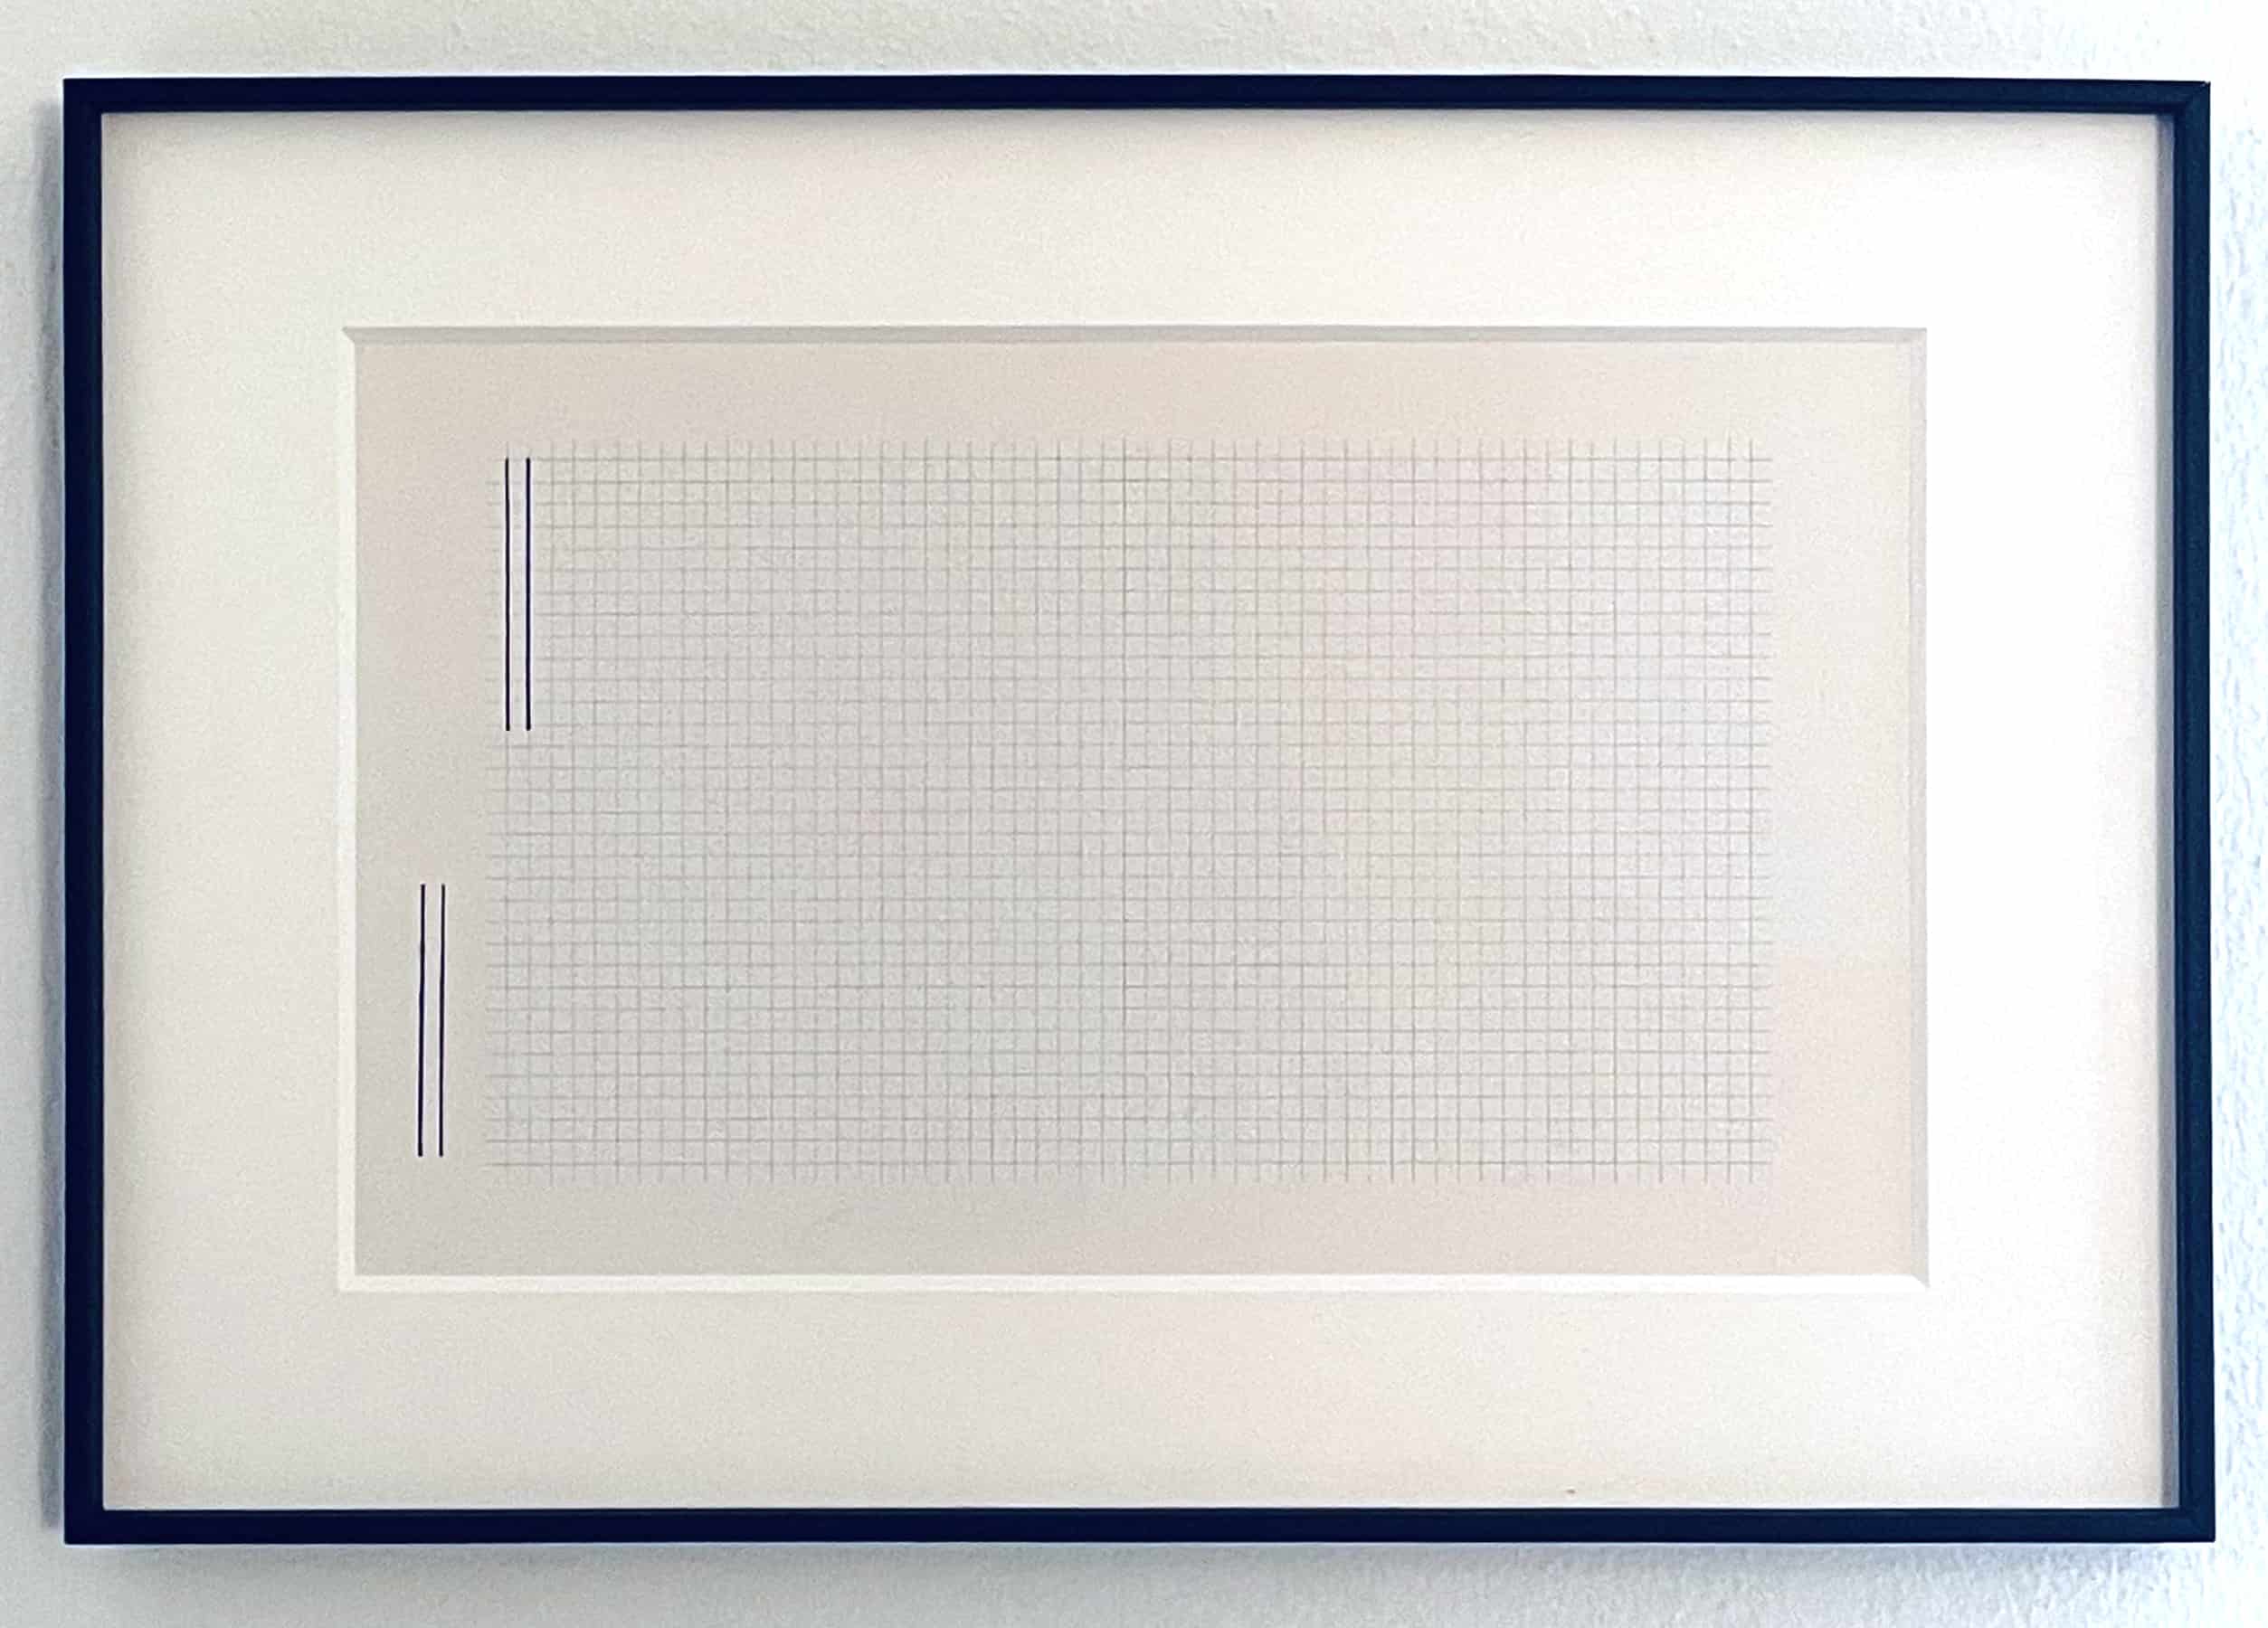 PETER DOWNSBROUGH | Untitled, 1973 / 74 | pencil and ink on paper | cm. 25 x 40